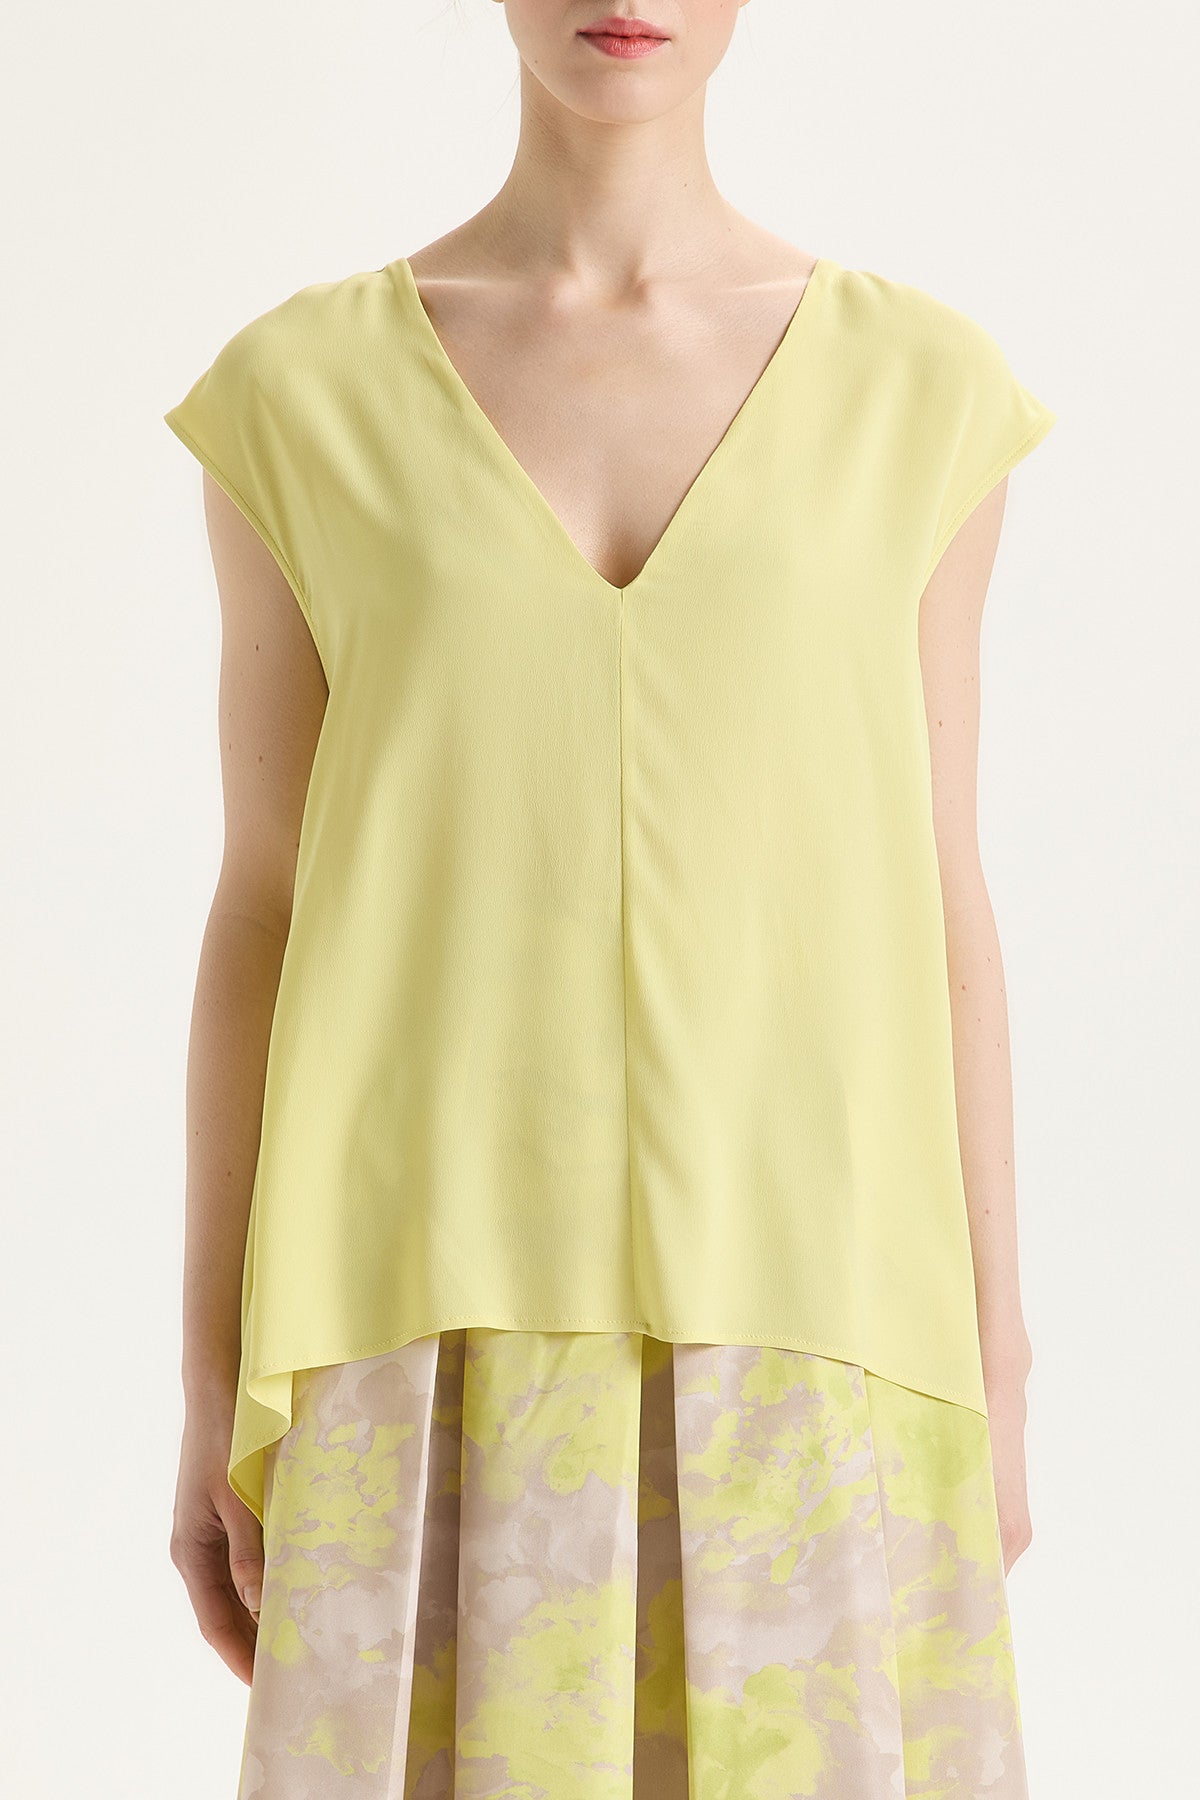 pale yellow crepe top